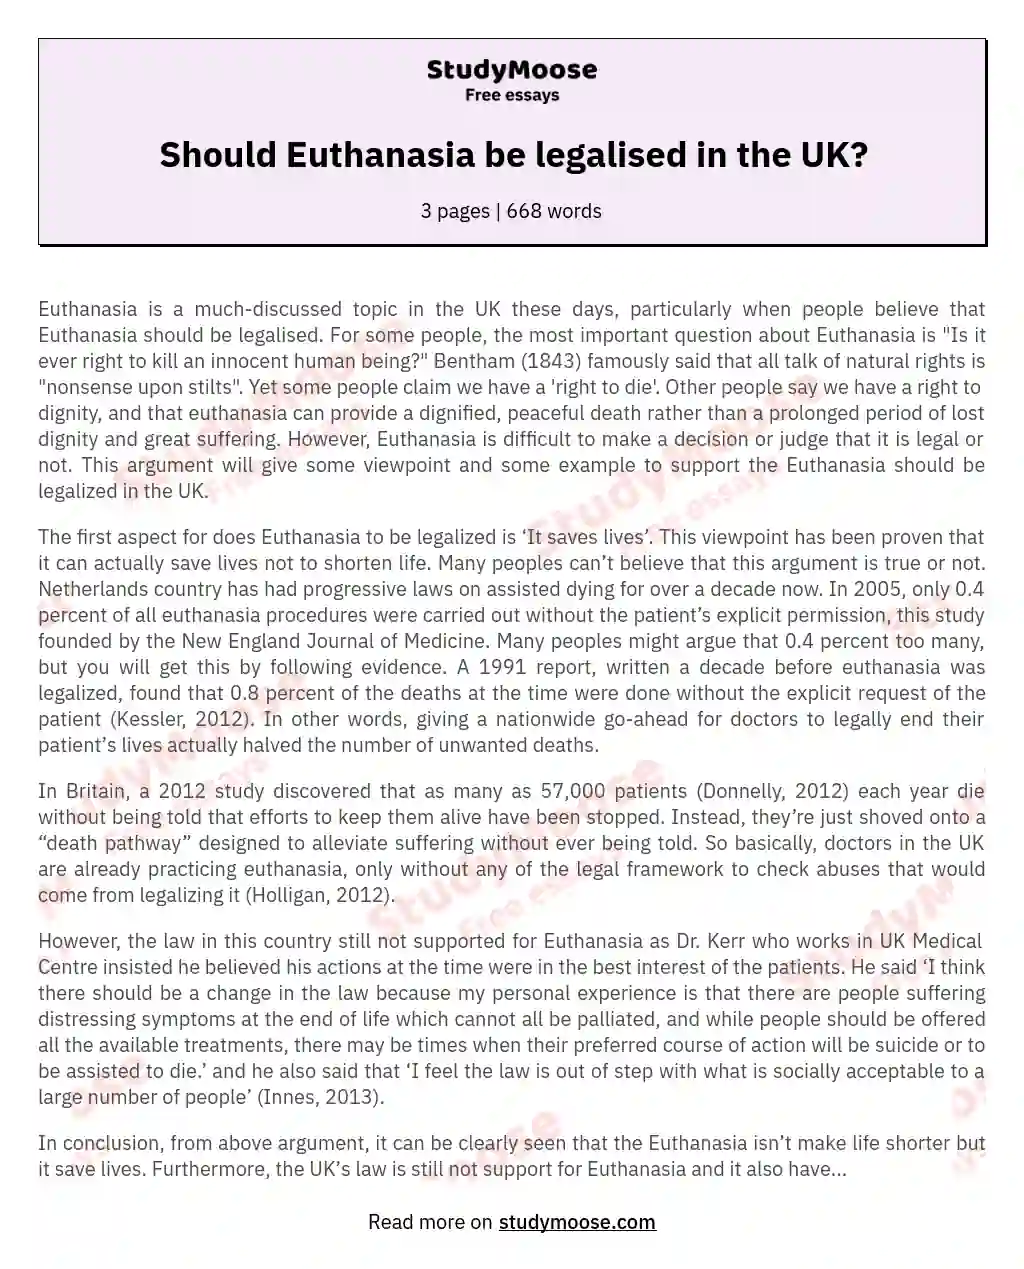 Should Euthanasia be legalised in the UK? essay